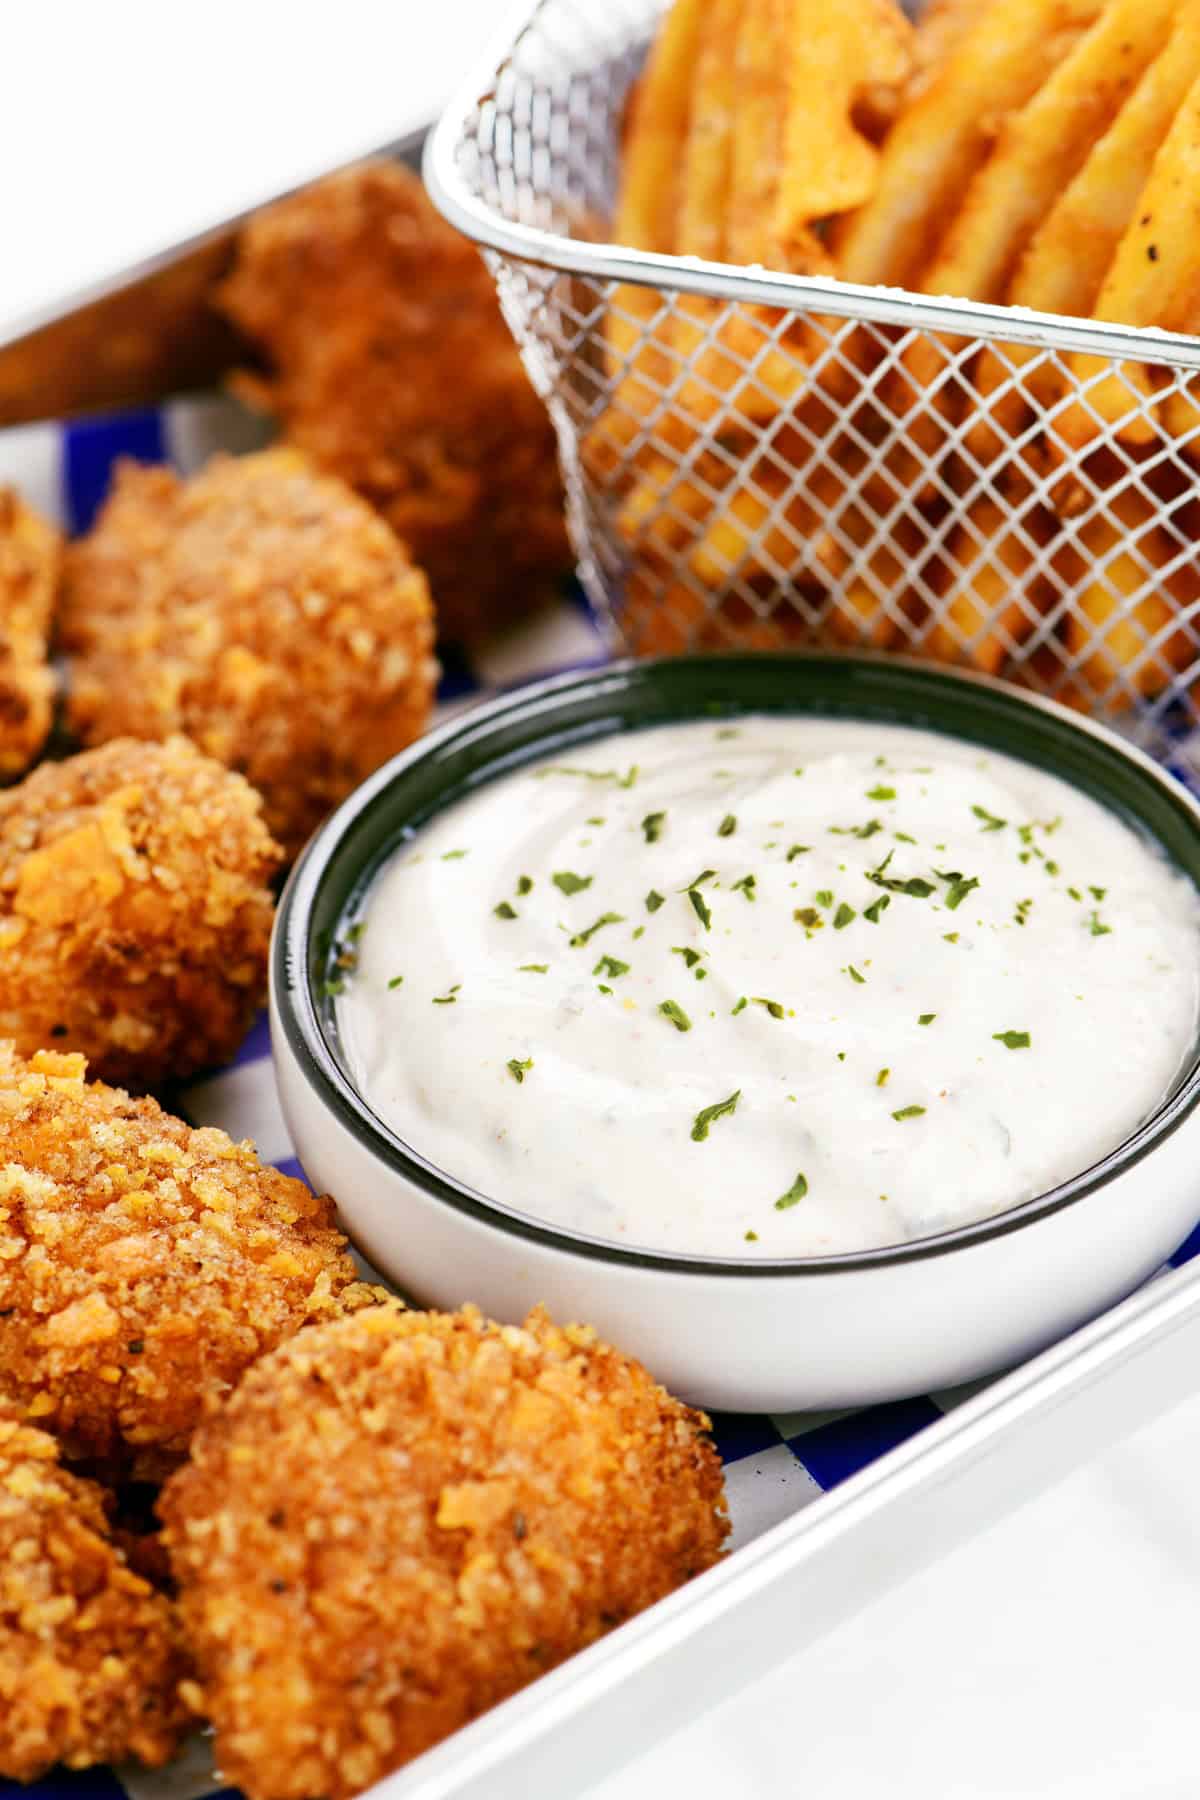 Seasoned sour cream in a small bowl on a tray with chicken nuggets and fries.